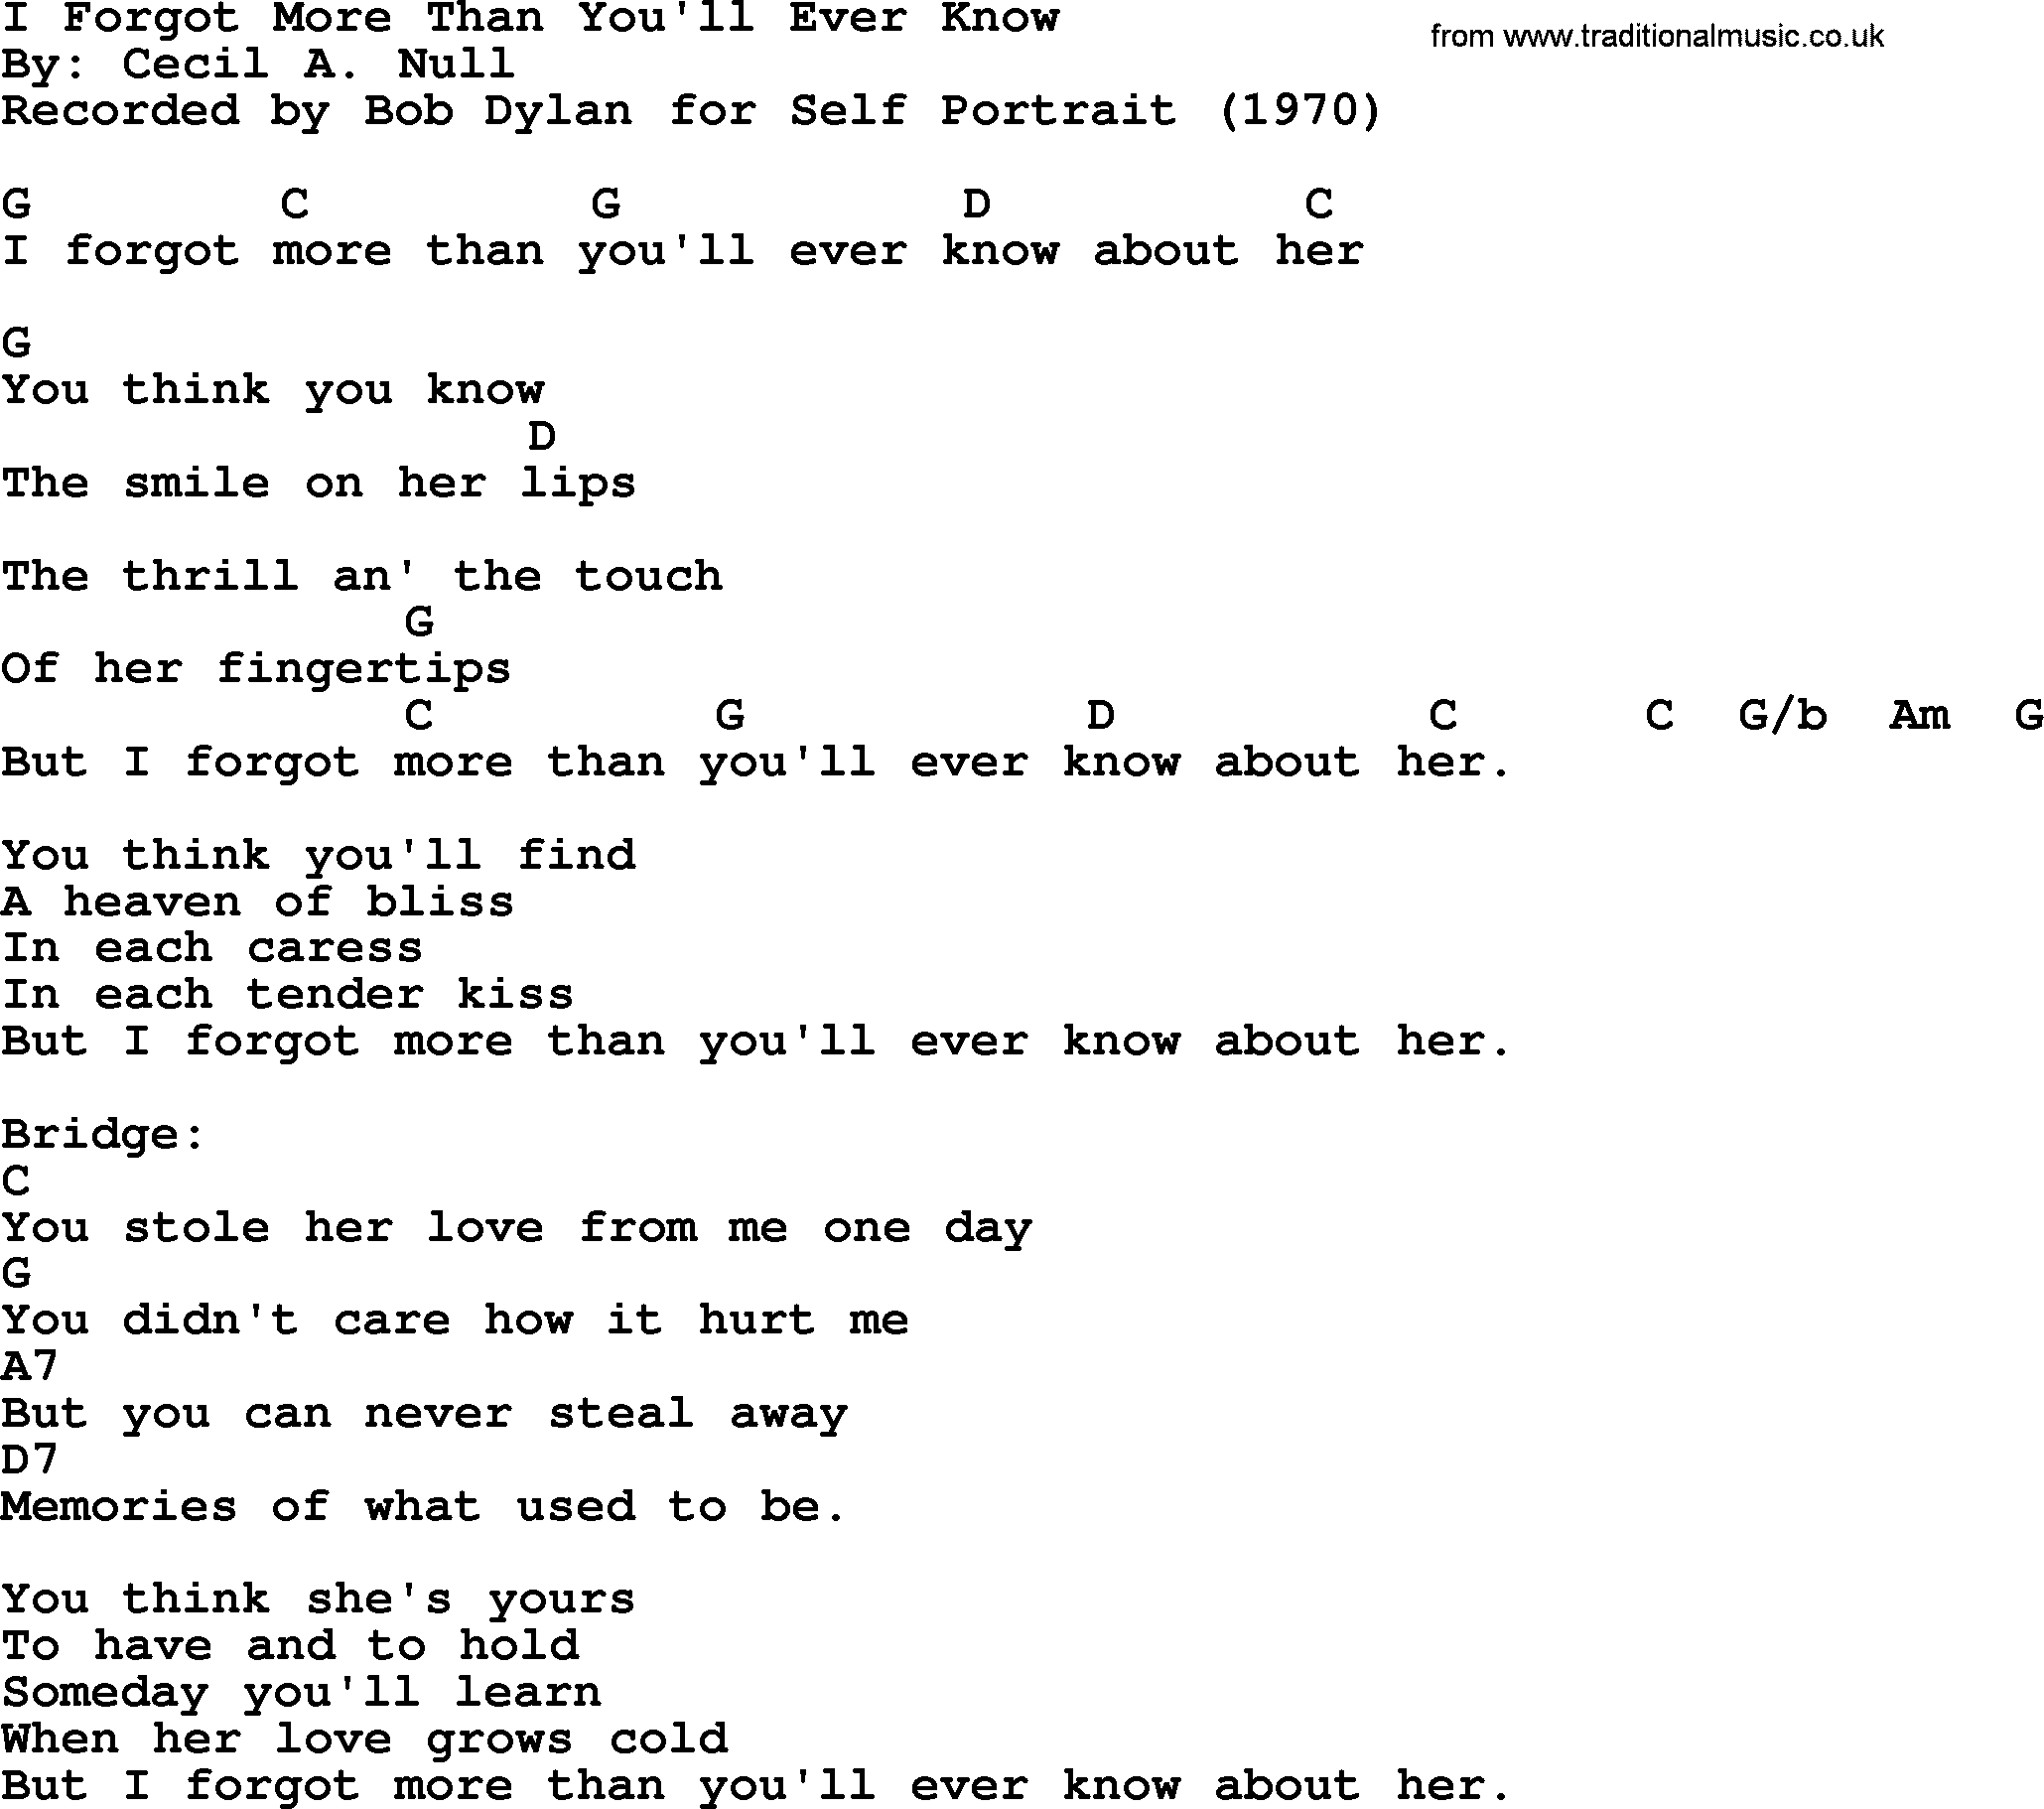 Bob Dylan song, lyrics with chords - I Forgot More Than You'll Ever Know